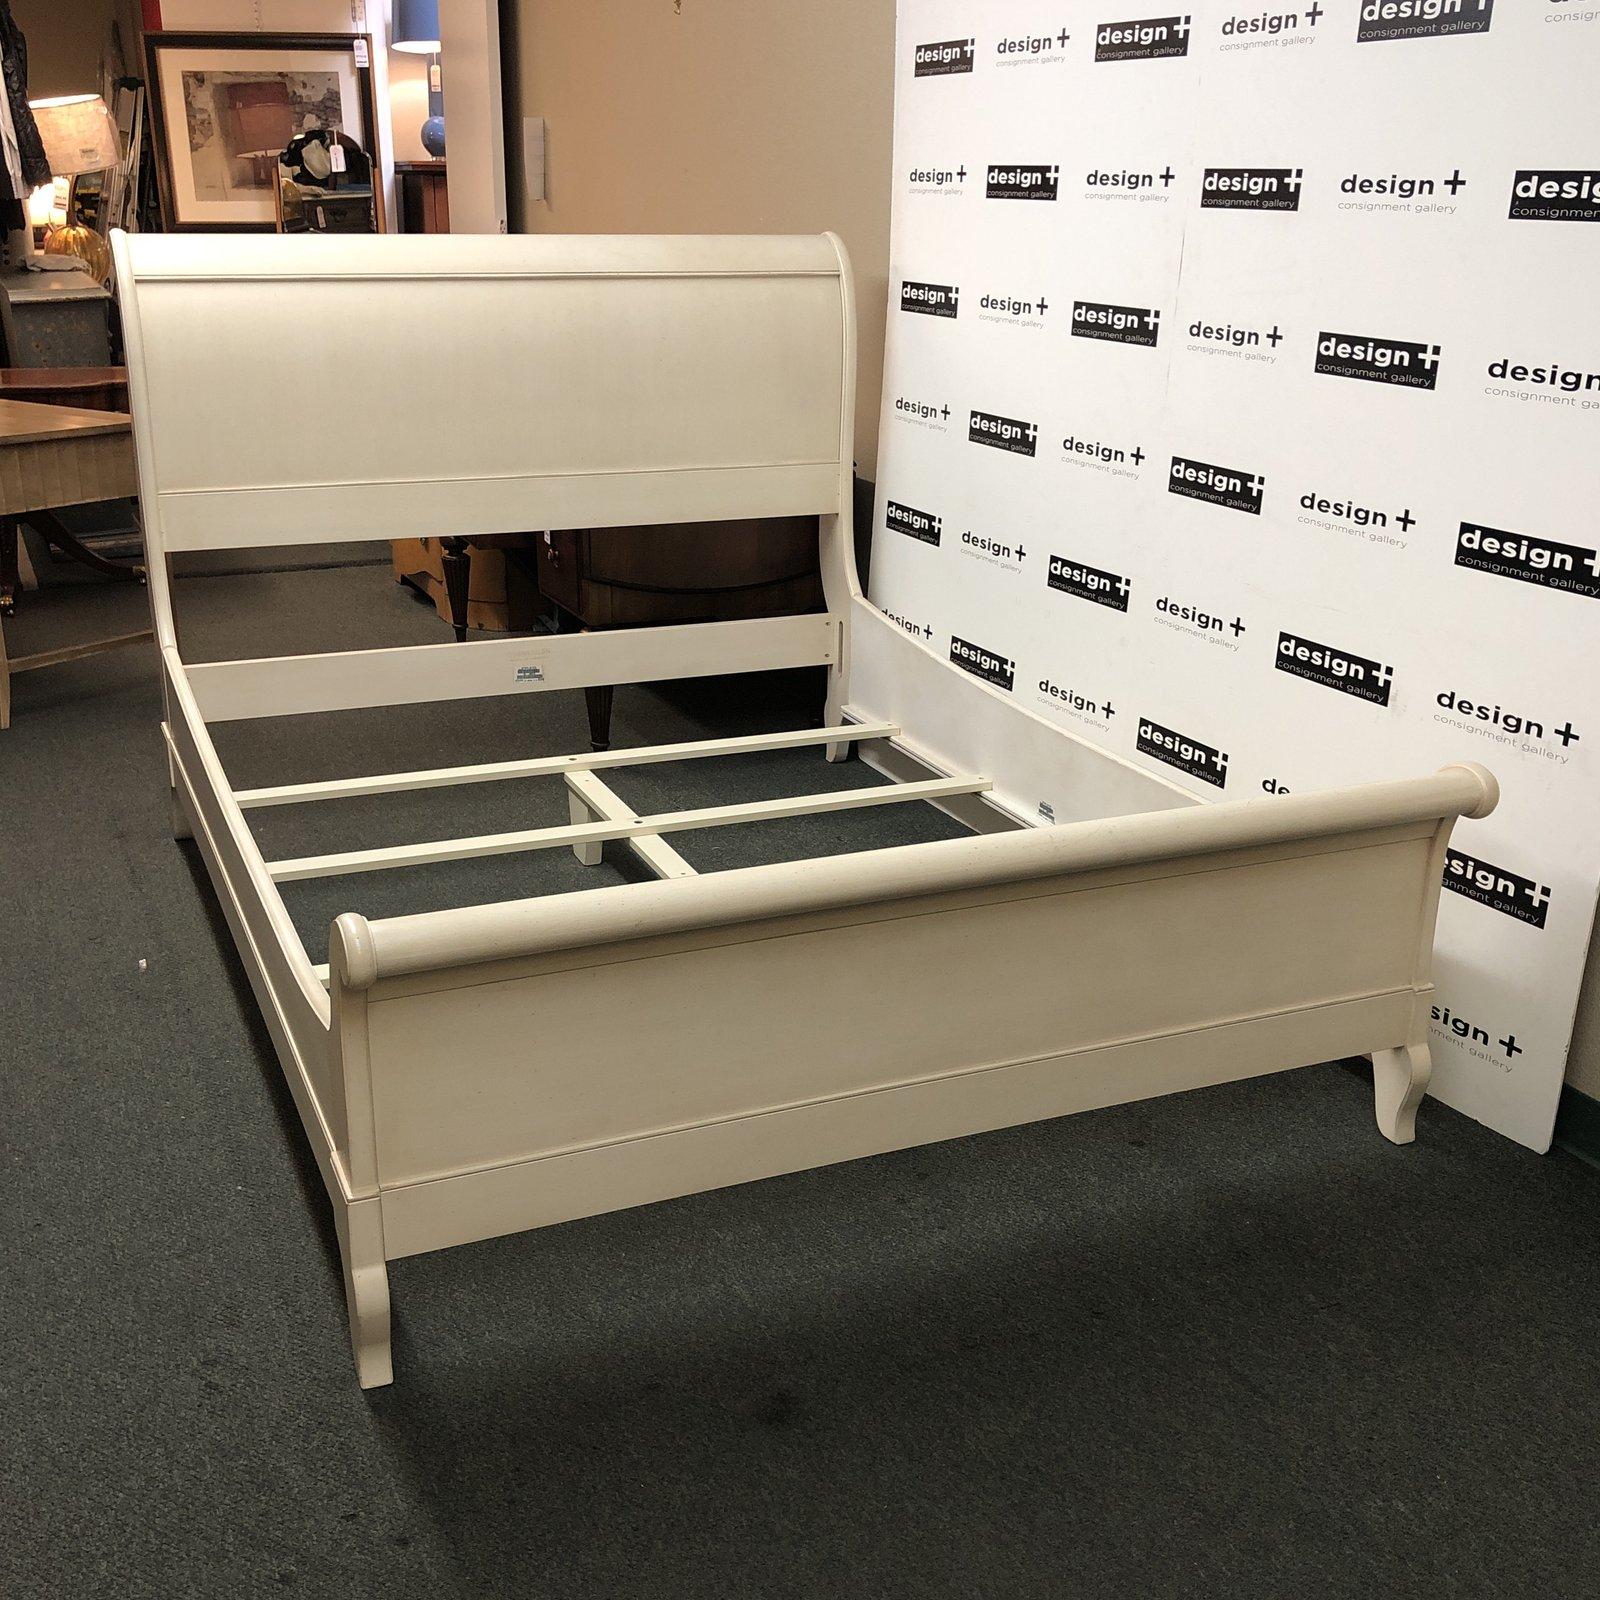 Design Plus Gallery presents sleigh bed by Ethan Allen. Bed is made out of solid wood and it was made is USA. Queen size.

Measures: Inside 62 x 82
Platform 8” H.